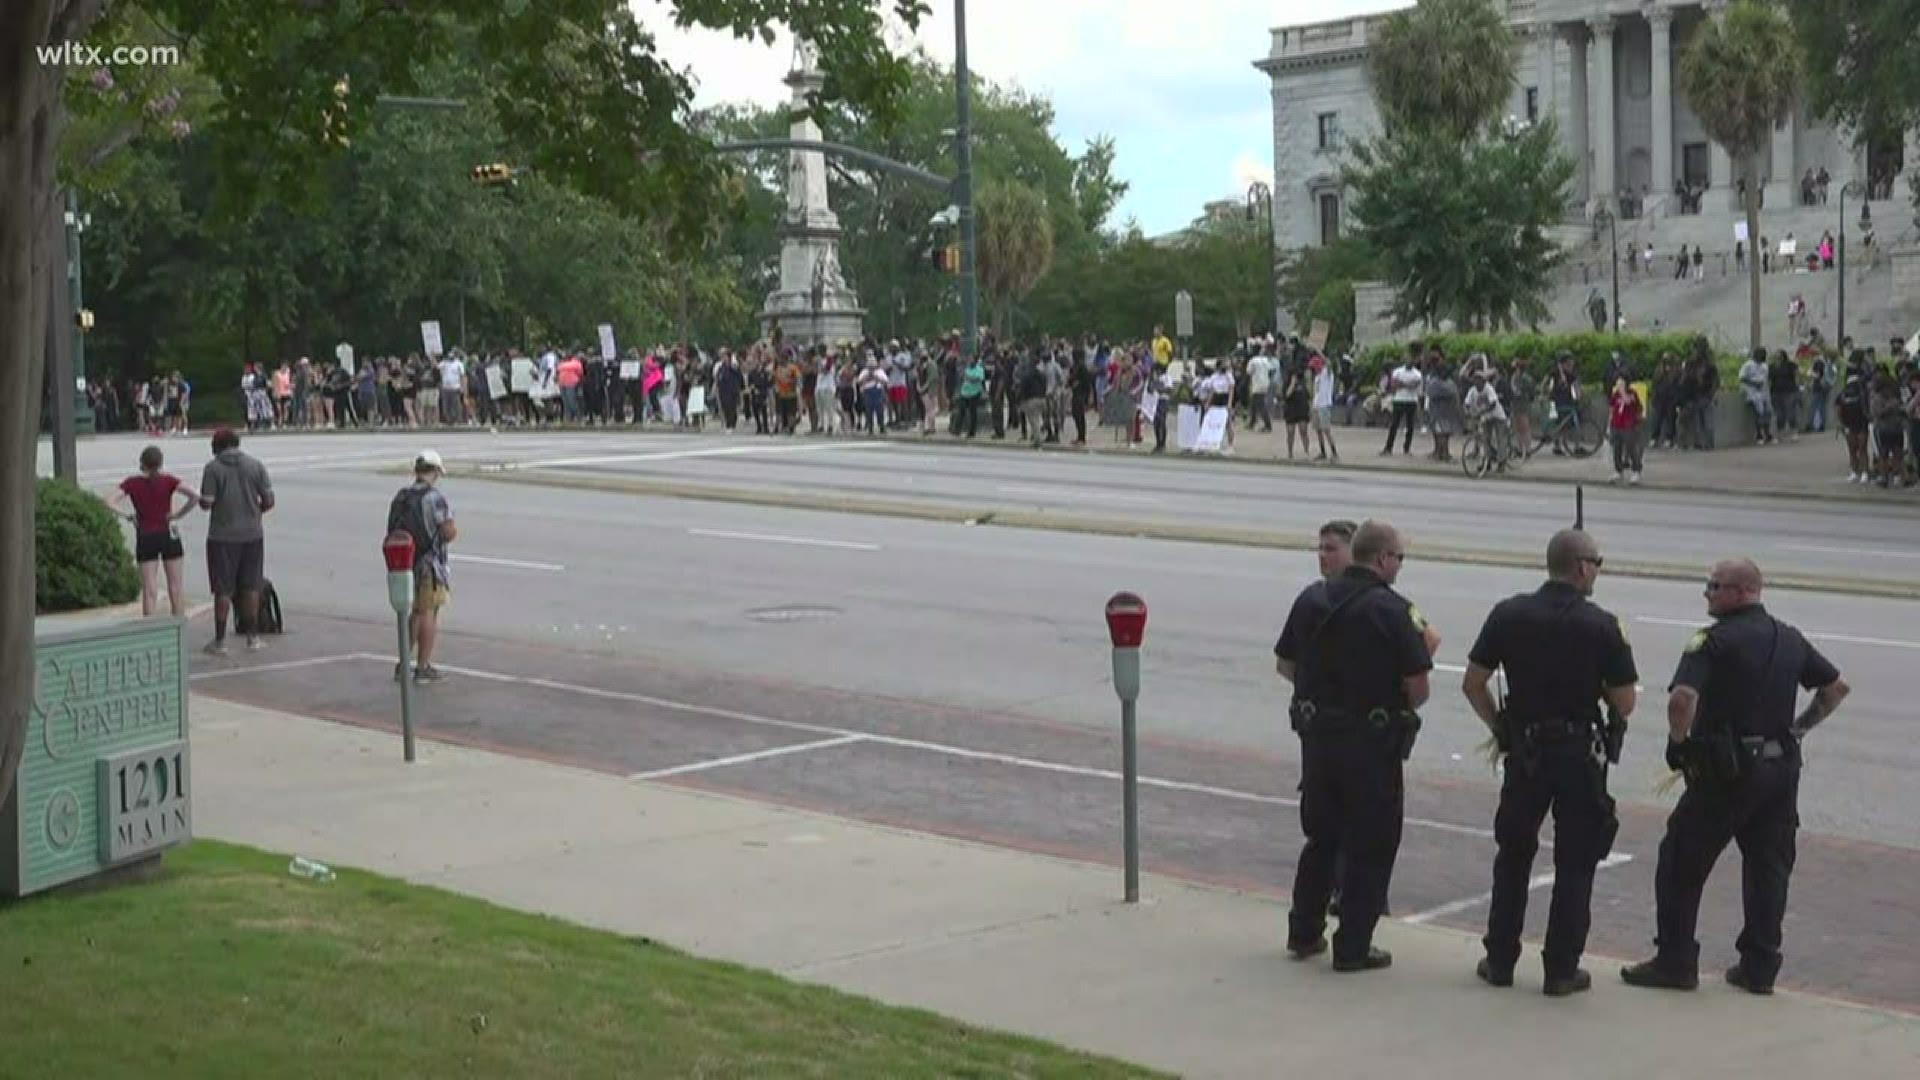 After being met by law enforcement near the police headquarters, protesters have moved back to State House.